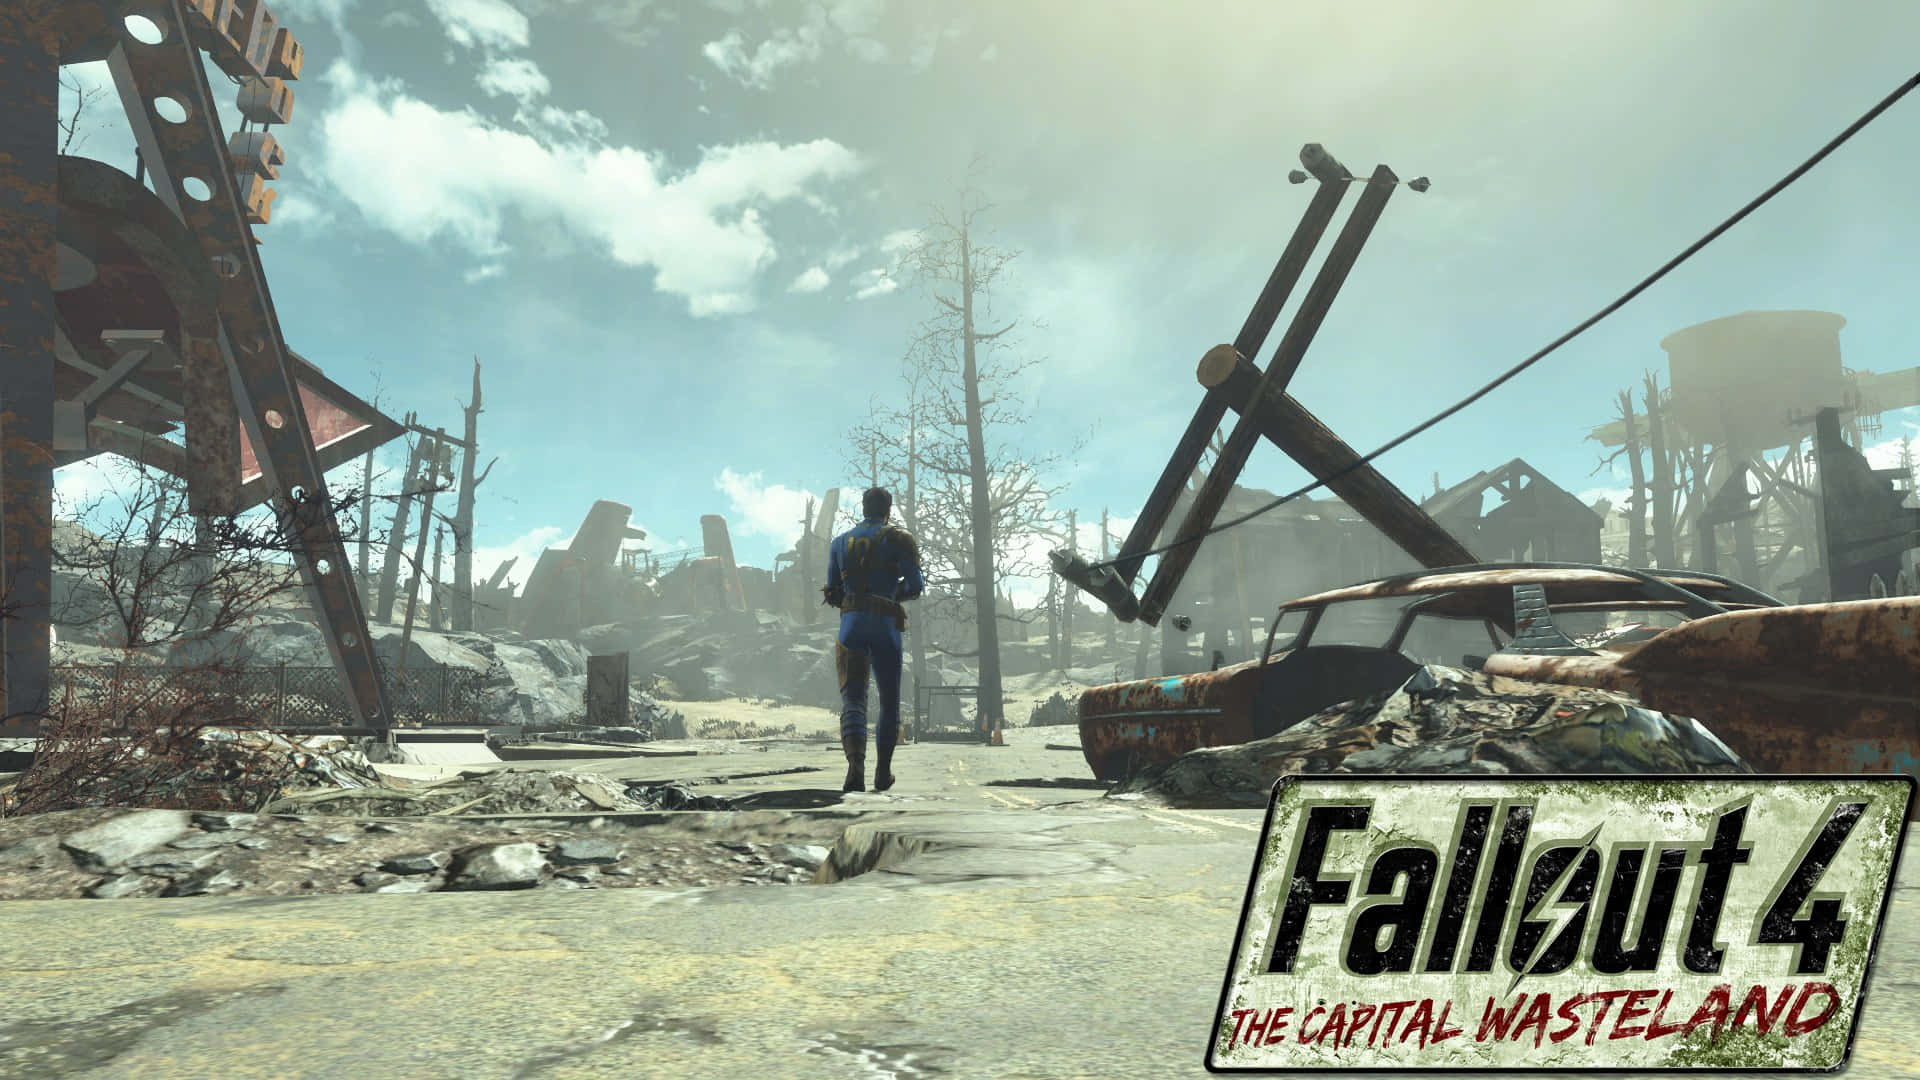 Exploring the Capital Wasteland in Fallout 4 Wallpaper